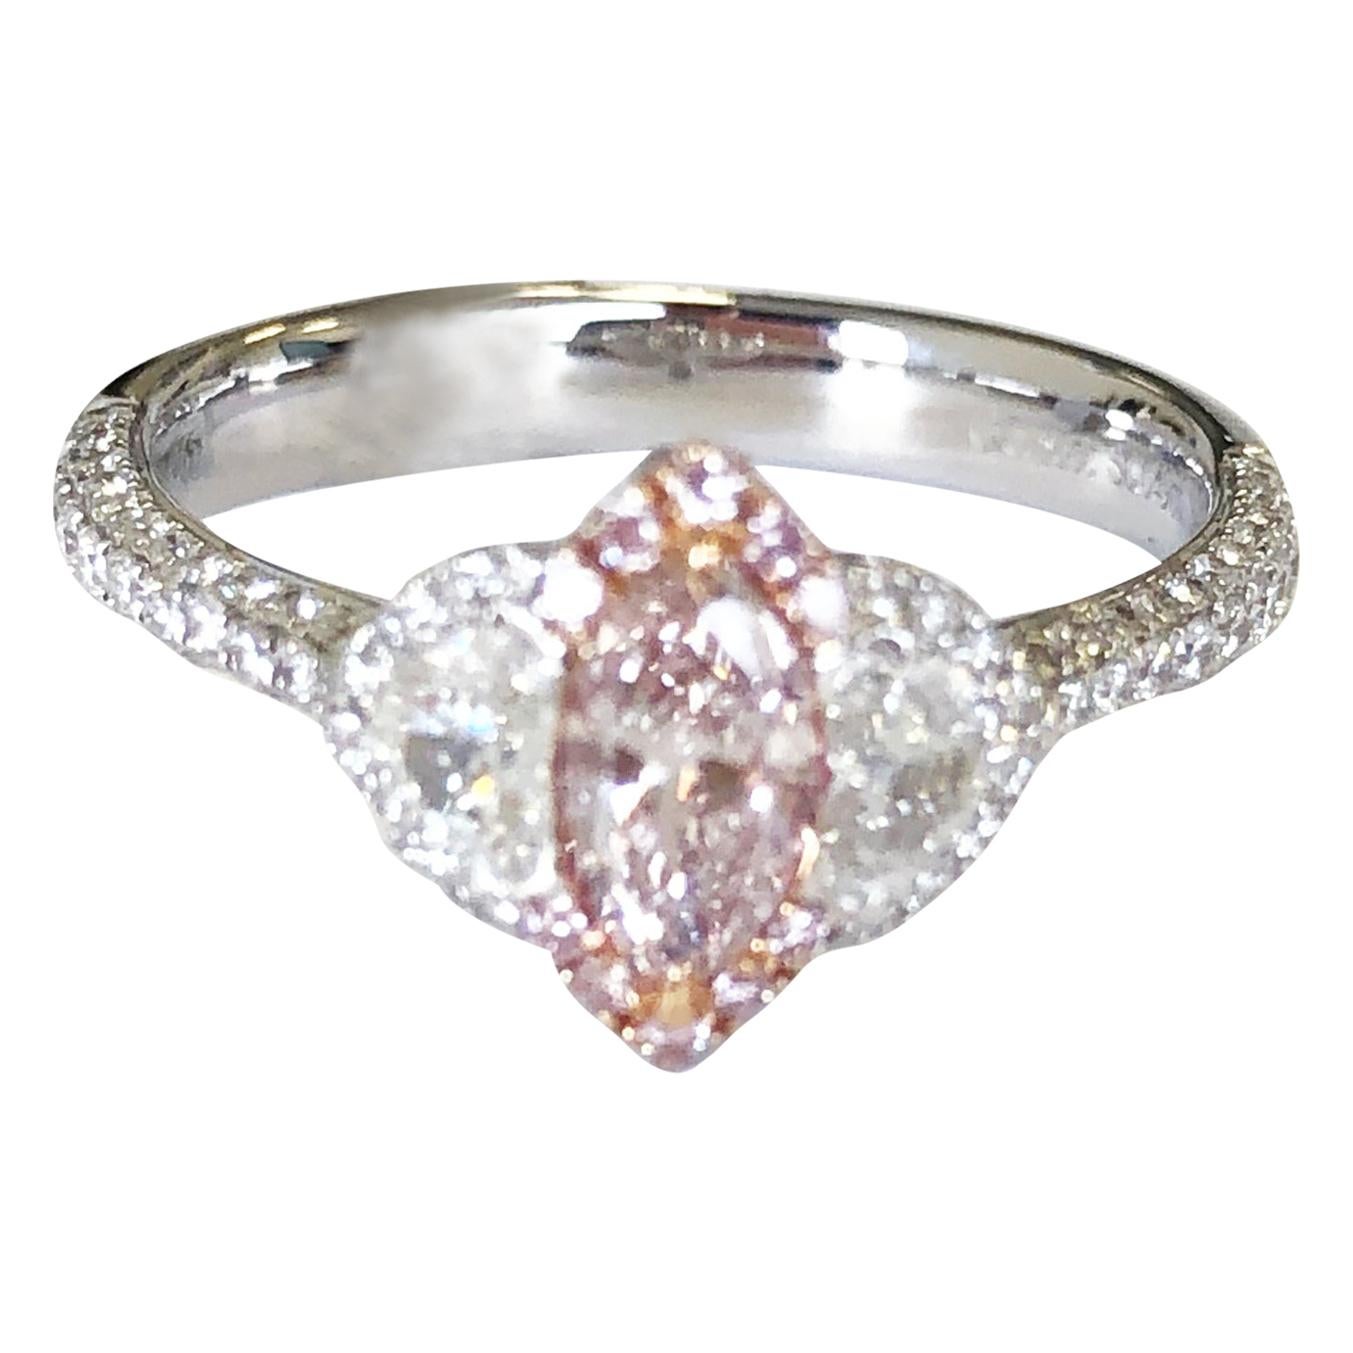 Natural Pink Marquis and White Diamond Cocktail Ring in 18 Karat White Gold